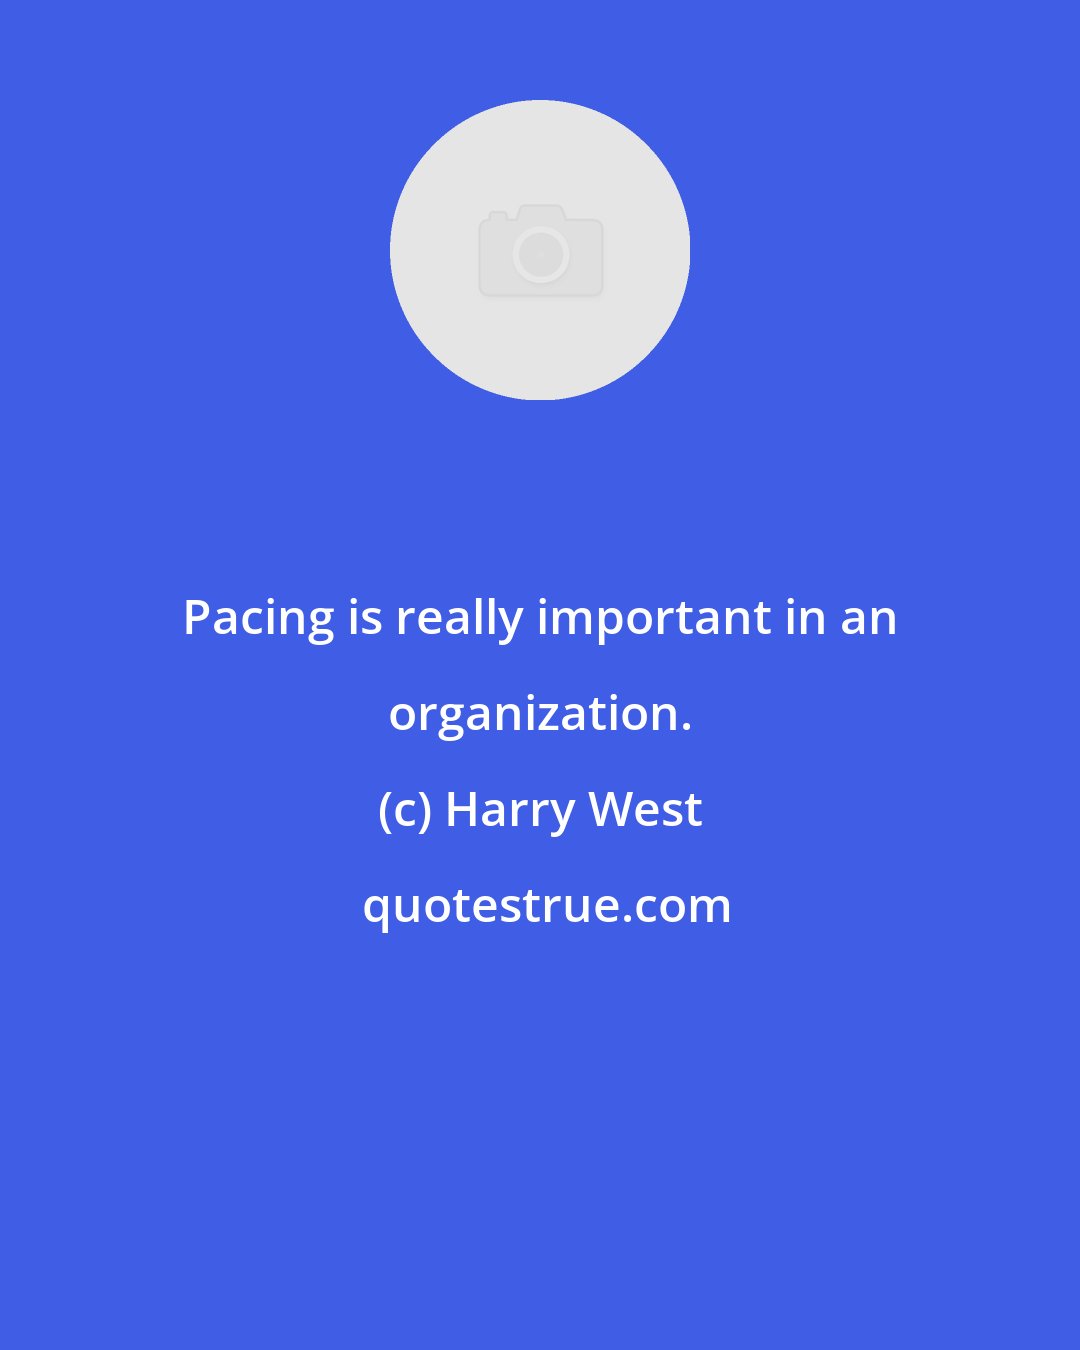 Harry West: Pacing is really important in an organization.